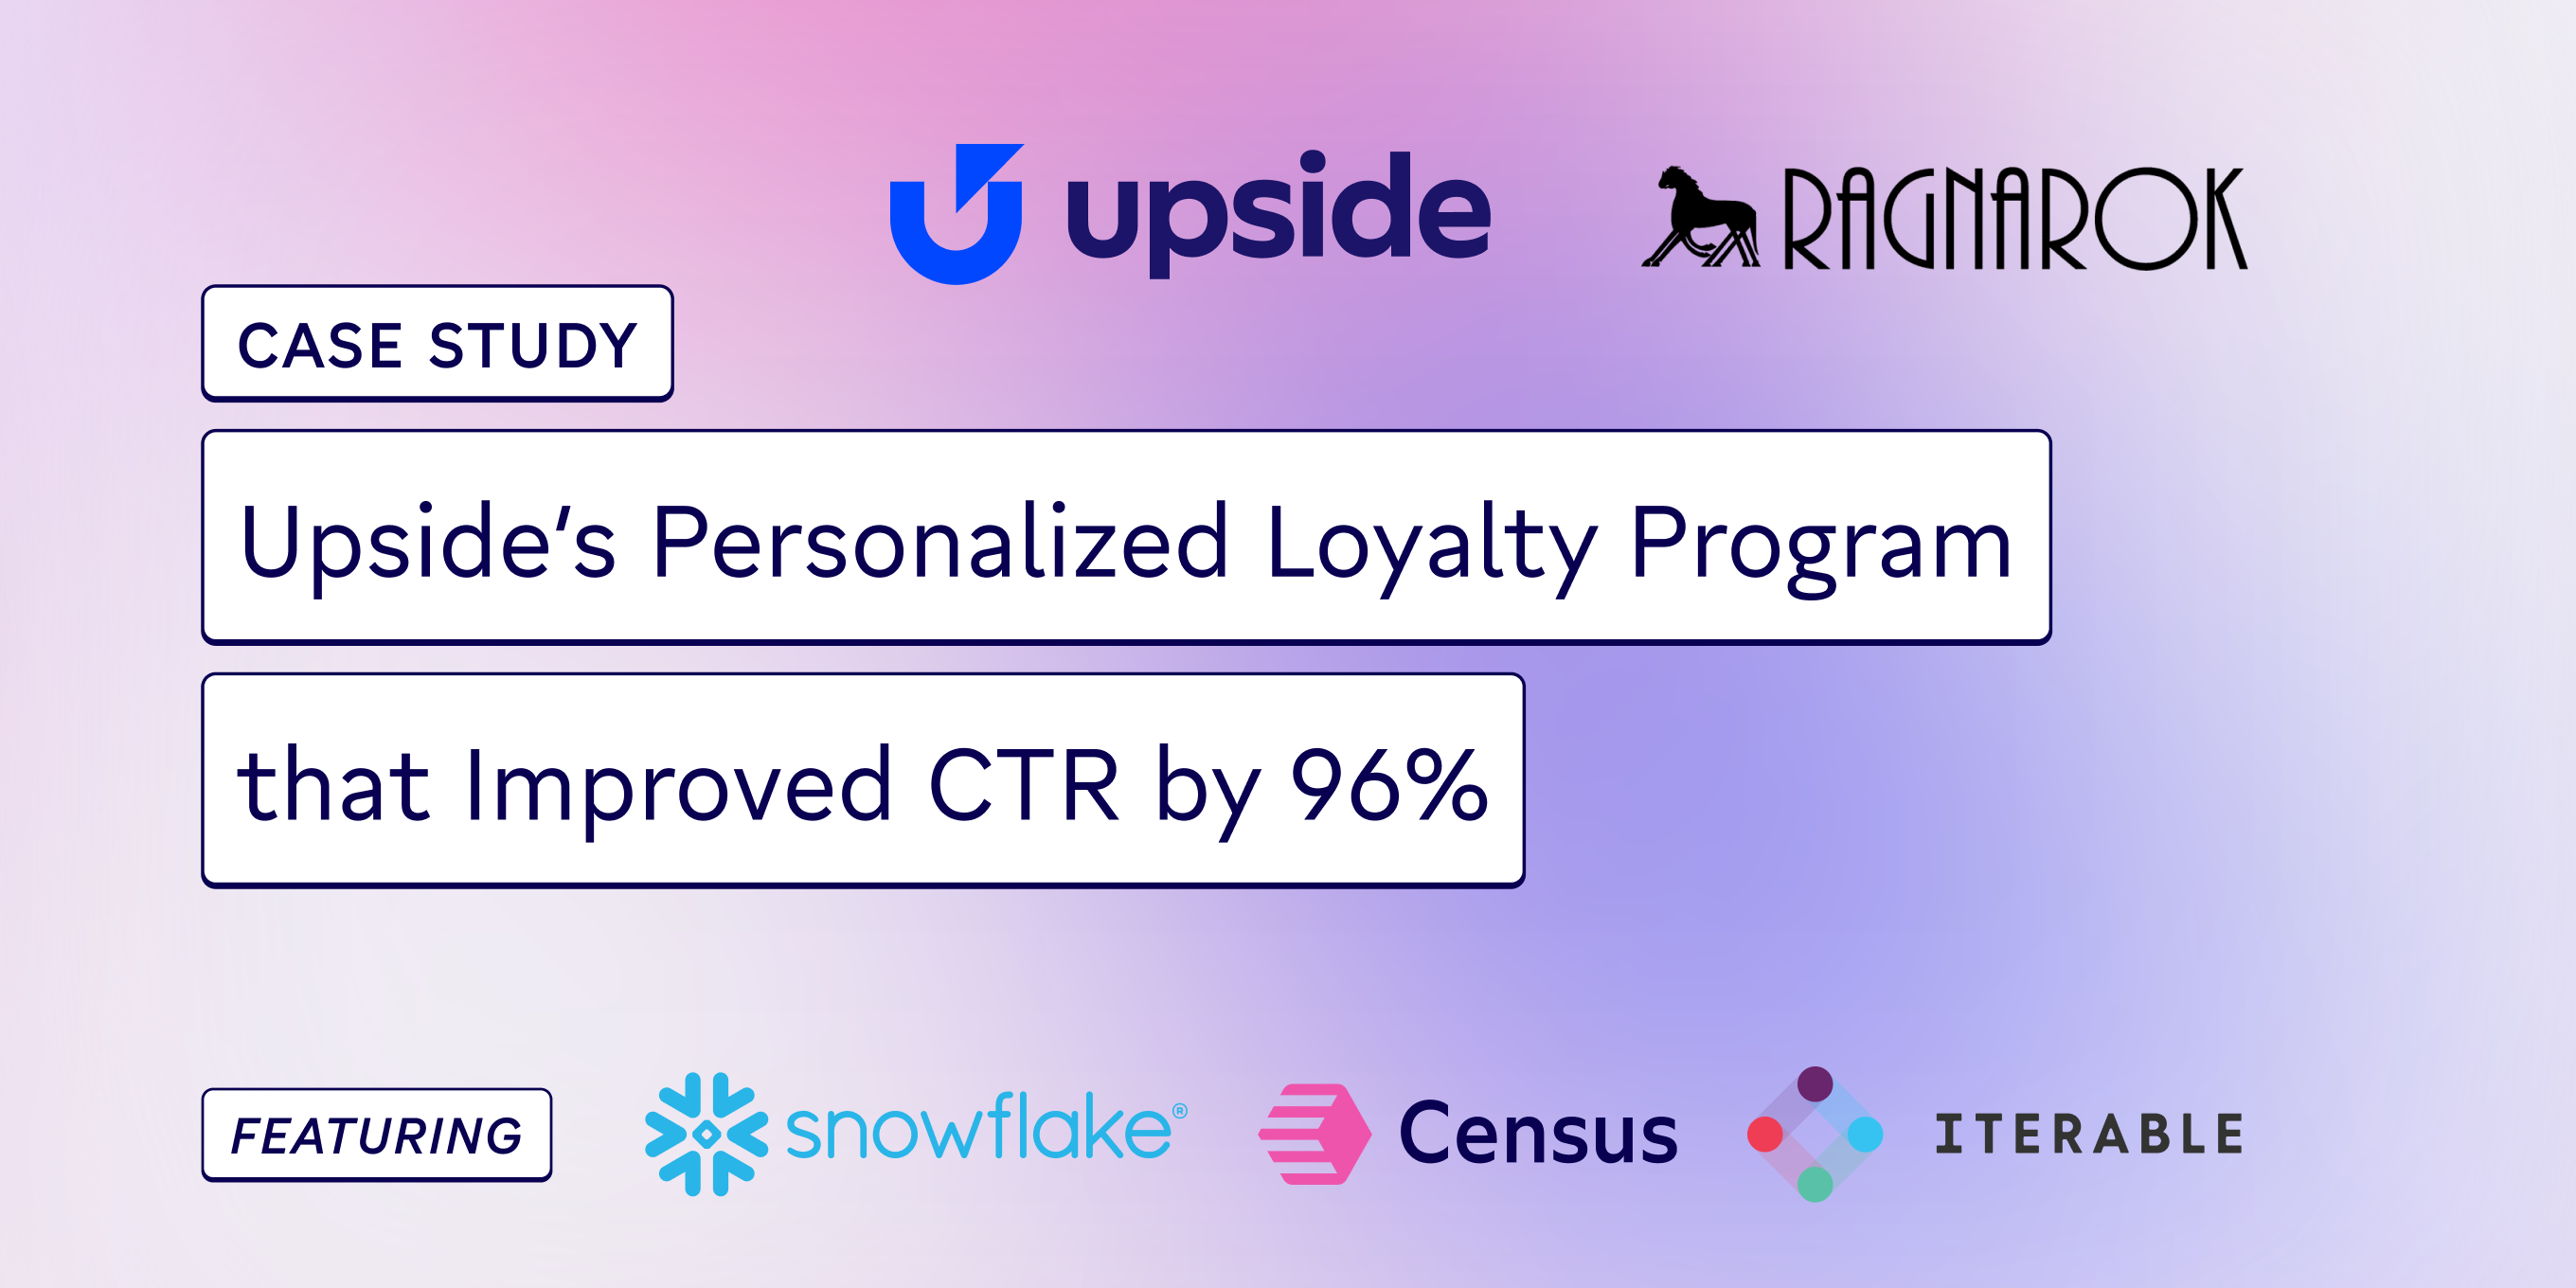 How Ragnarok Deployed a Personalized Loyalty Program for Upside with Census + Iterable